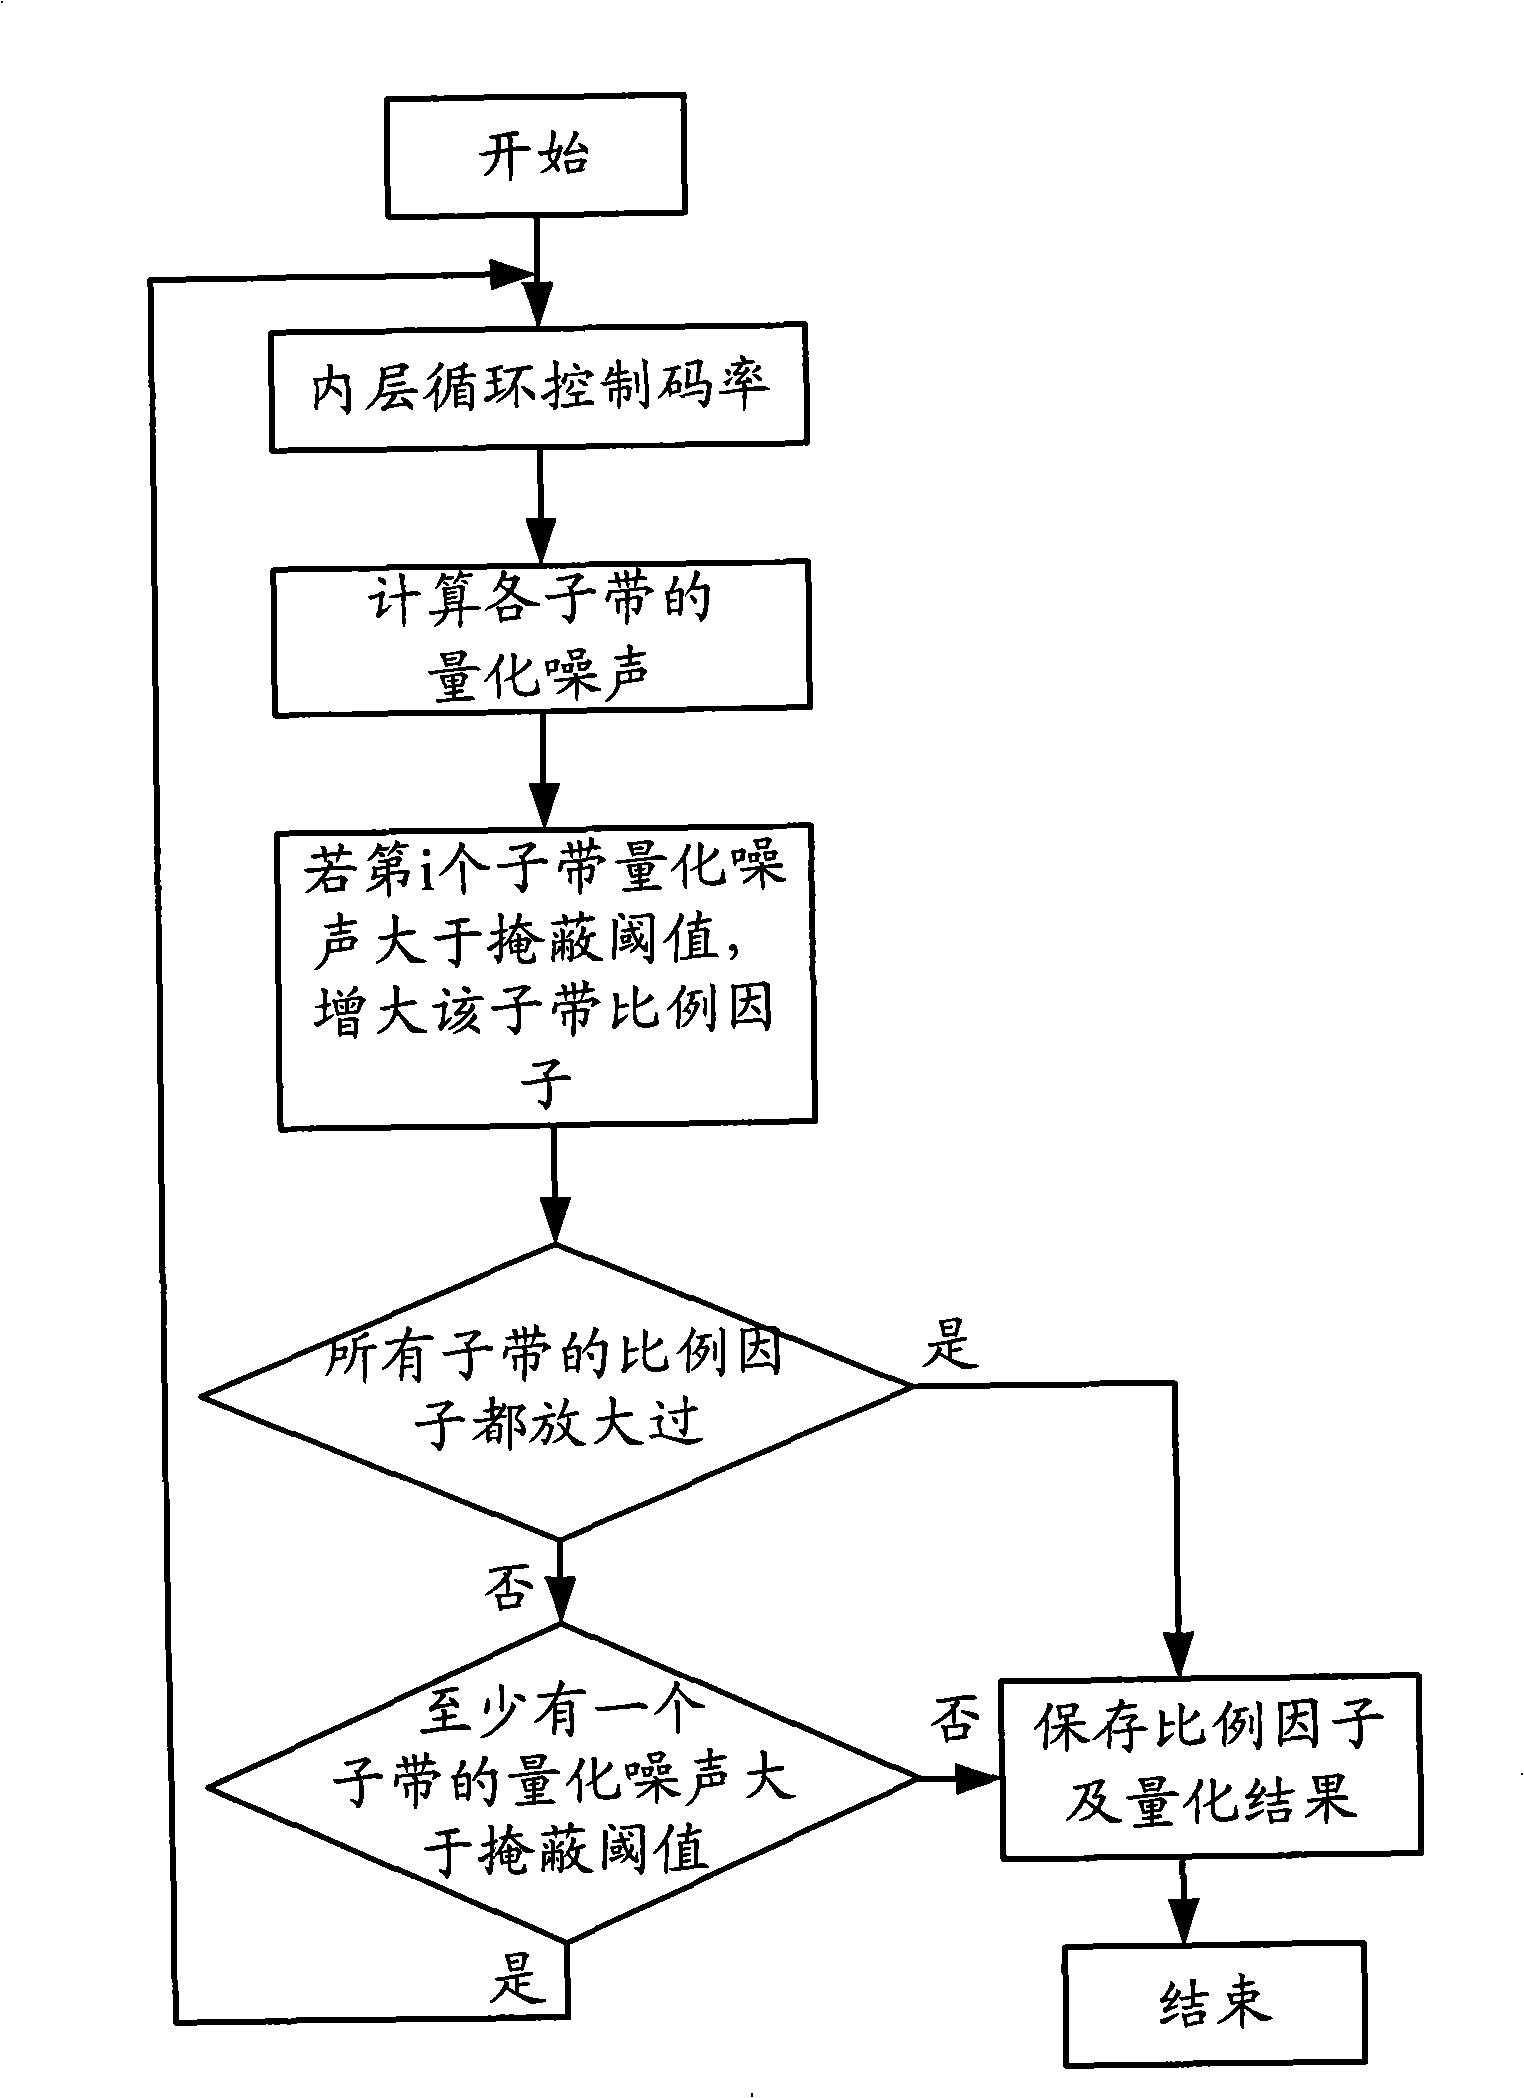 Audio code rate control method and system